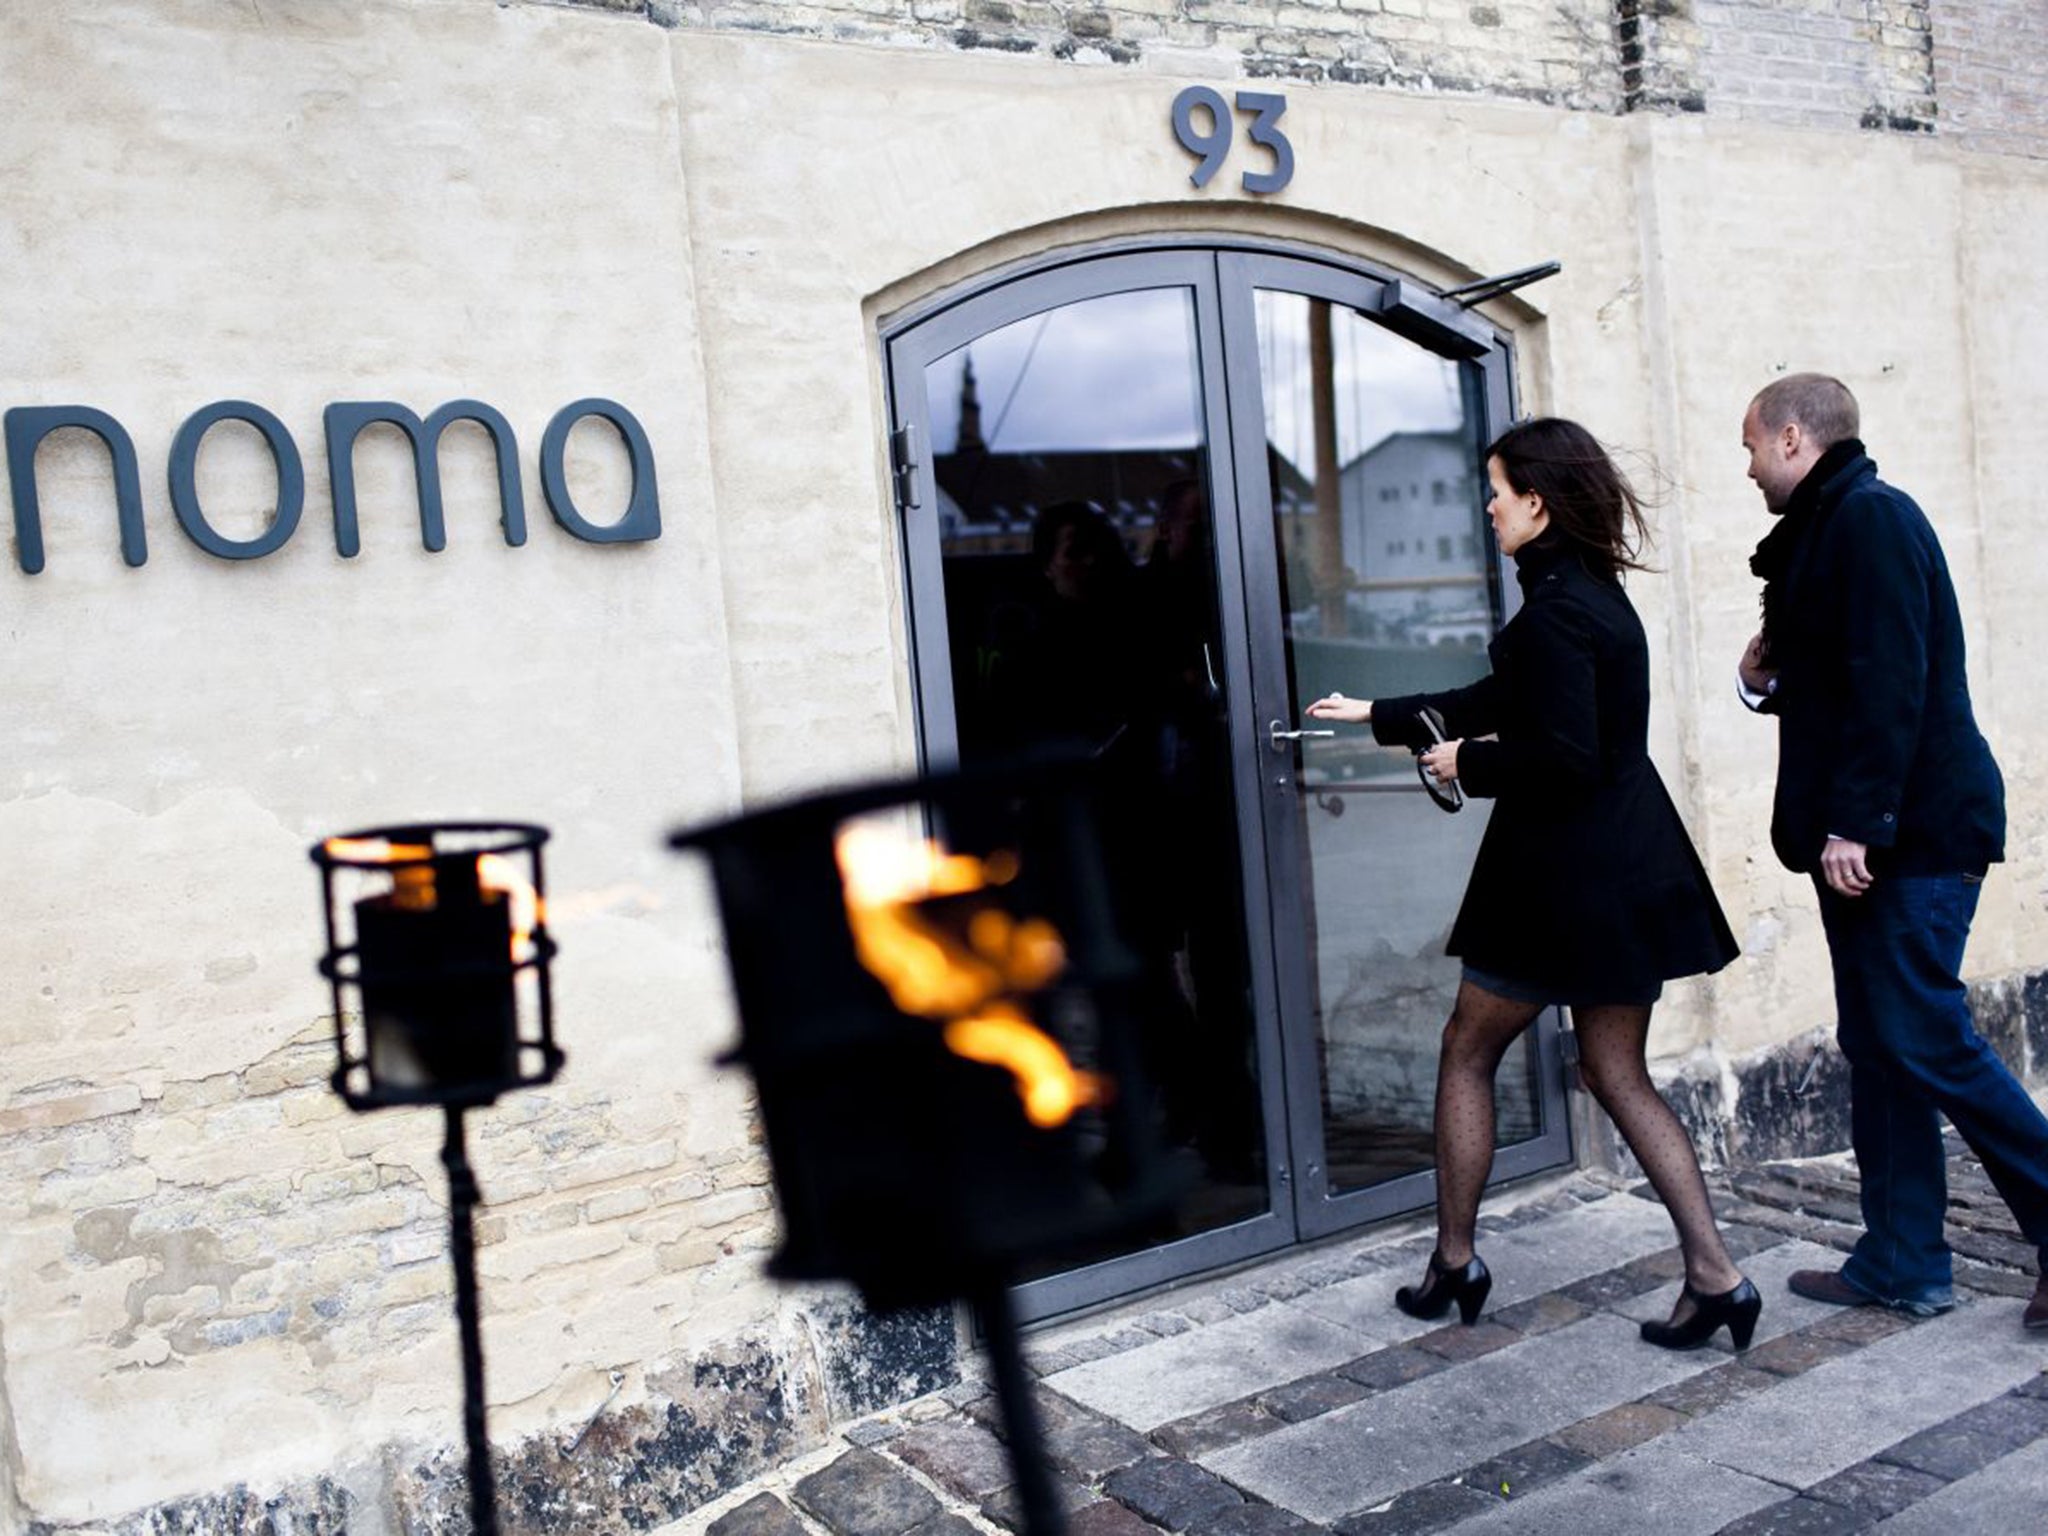 Noma has taken the award as the world's best restaurant for five out of the past six years